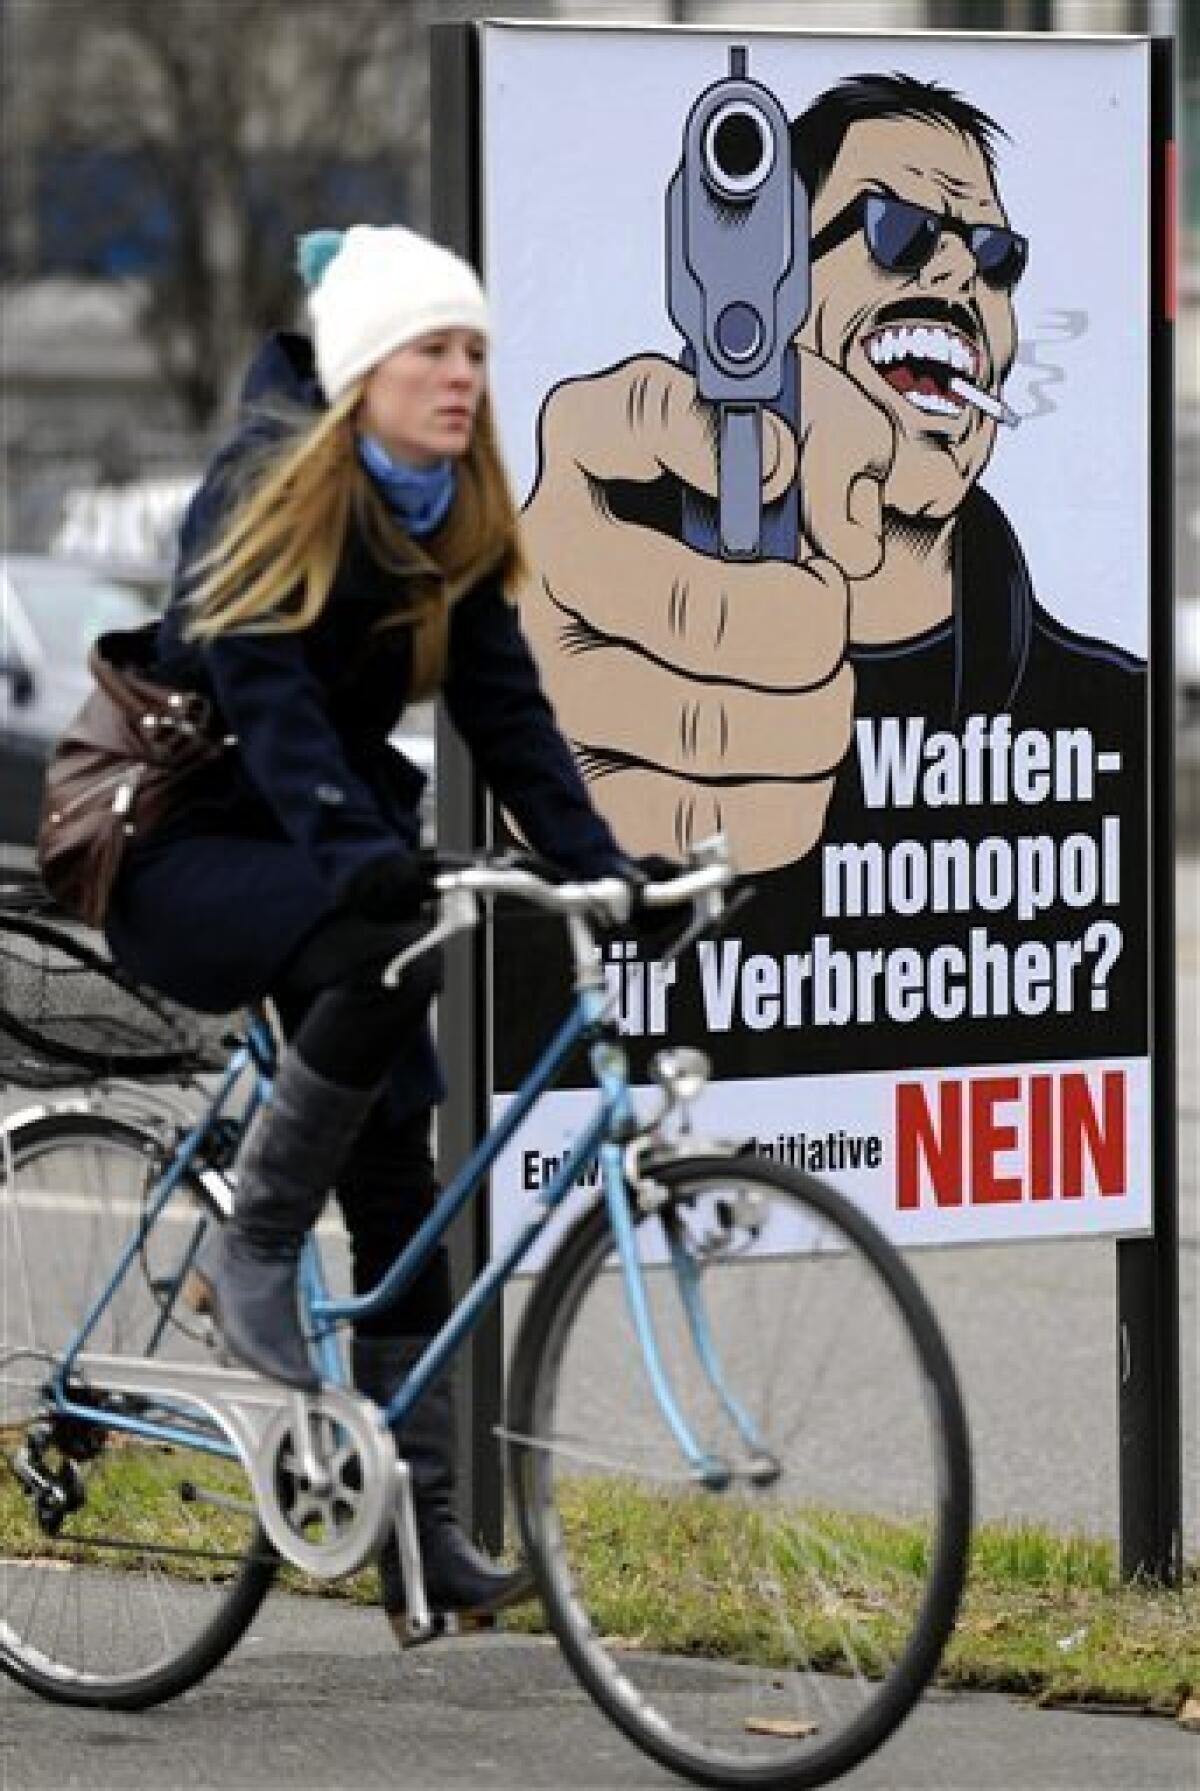 TO GO WITH STORY BY FRANK JORDANS - FILE - In this Jan. 11, 2011 file picture a woman passes a poster reading: 'Weapons Monopoly for Criminals? No' in Zurich, Switzerland. Swiss gun culture meets grassroots democracy Sunday, Feb 13, 2011 in a referendum dividing those who hope to cut the country's high rate of firearms suicides and those who fear tighter rules may kill off village shooting clubs and even cripple Switzerland's legendary citizen militia. (AP Photo/Keystone/Walter Bieri,File )